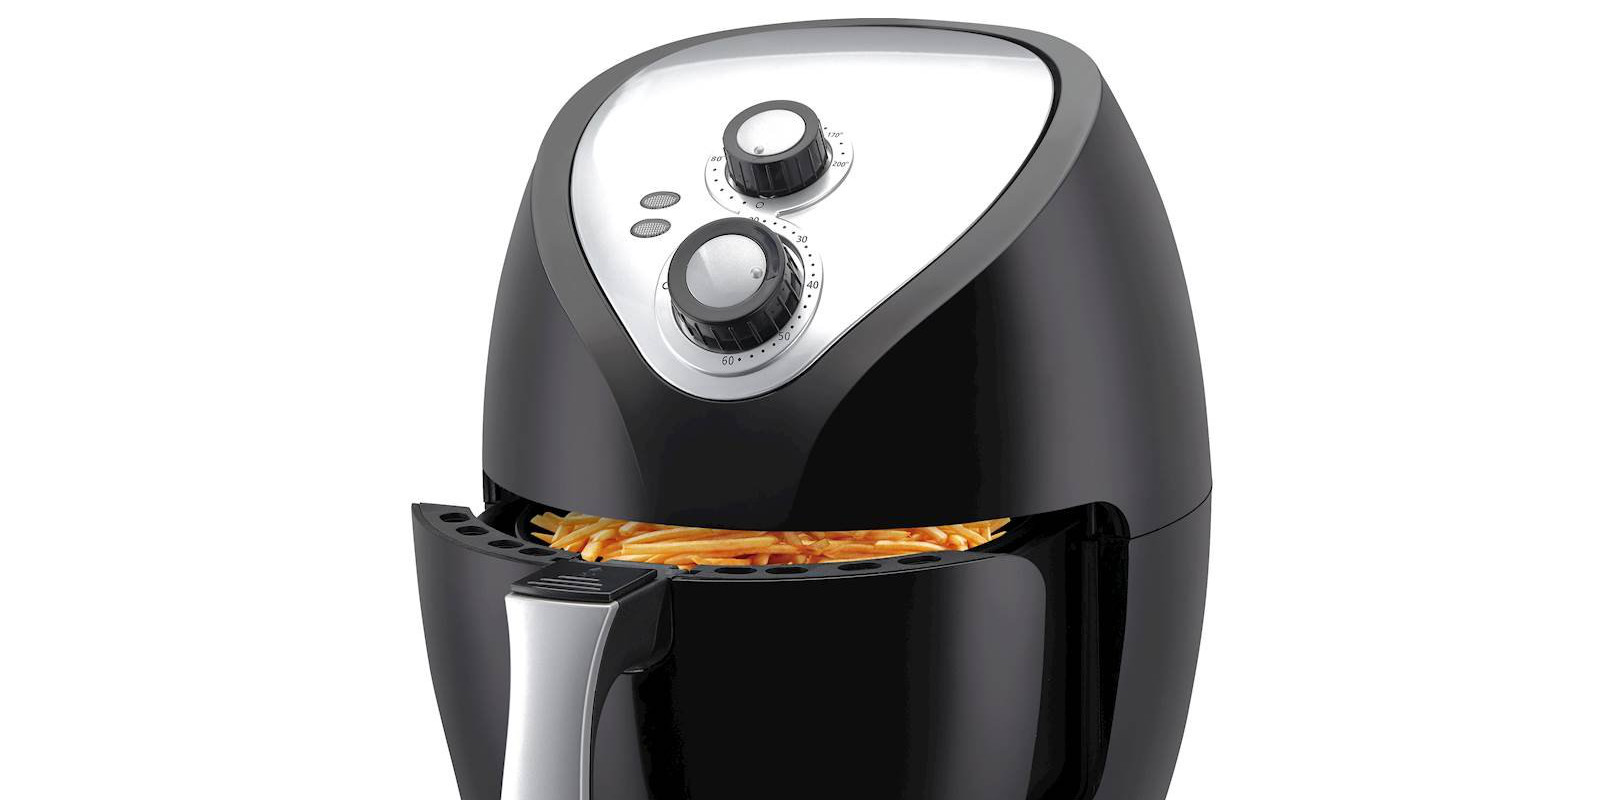 https://9to5toys.com/wp-content/uploads/sites/5/2020/04/Emerald-4-L-Analog-Air-Fryer-copy.jpg